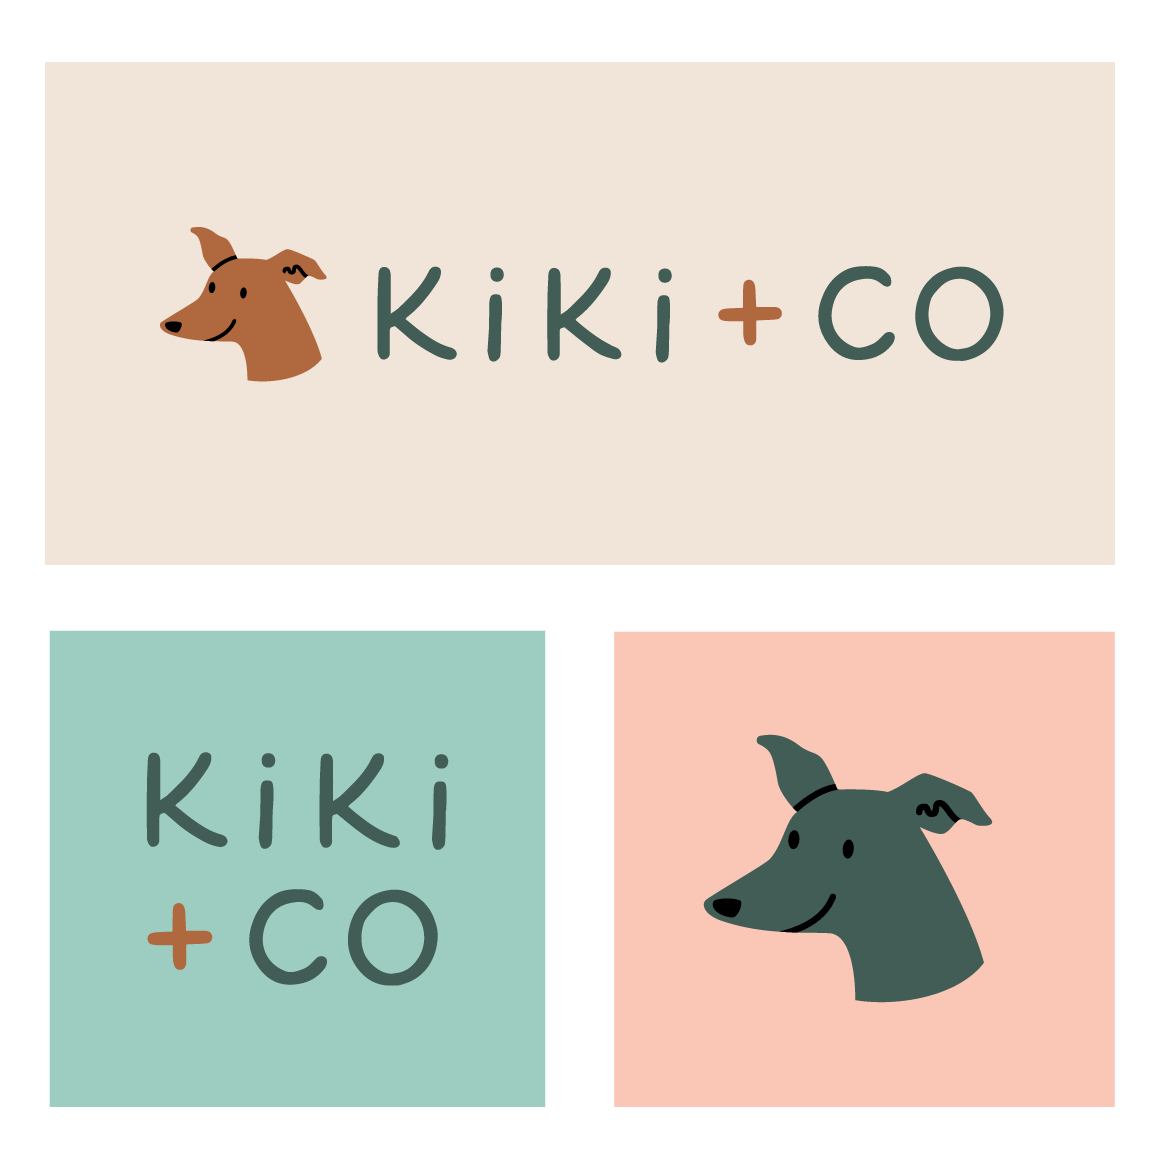 Kiki & Co's logo in various colour ways and arrangements